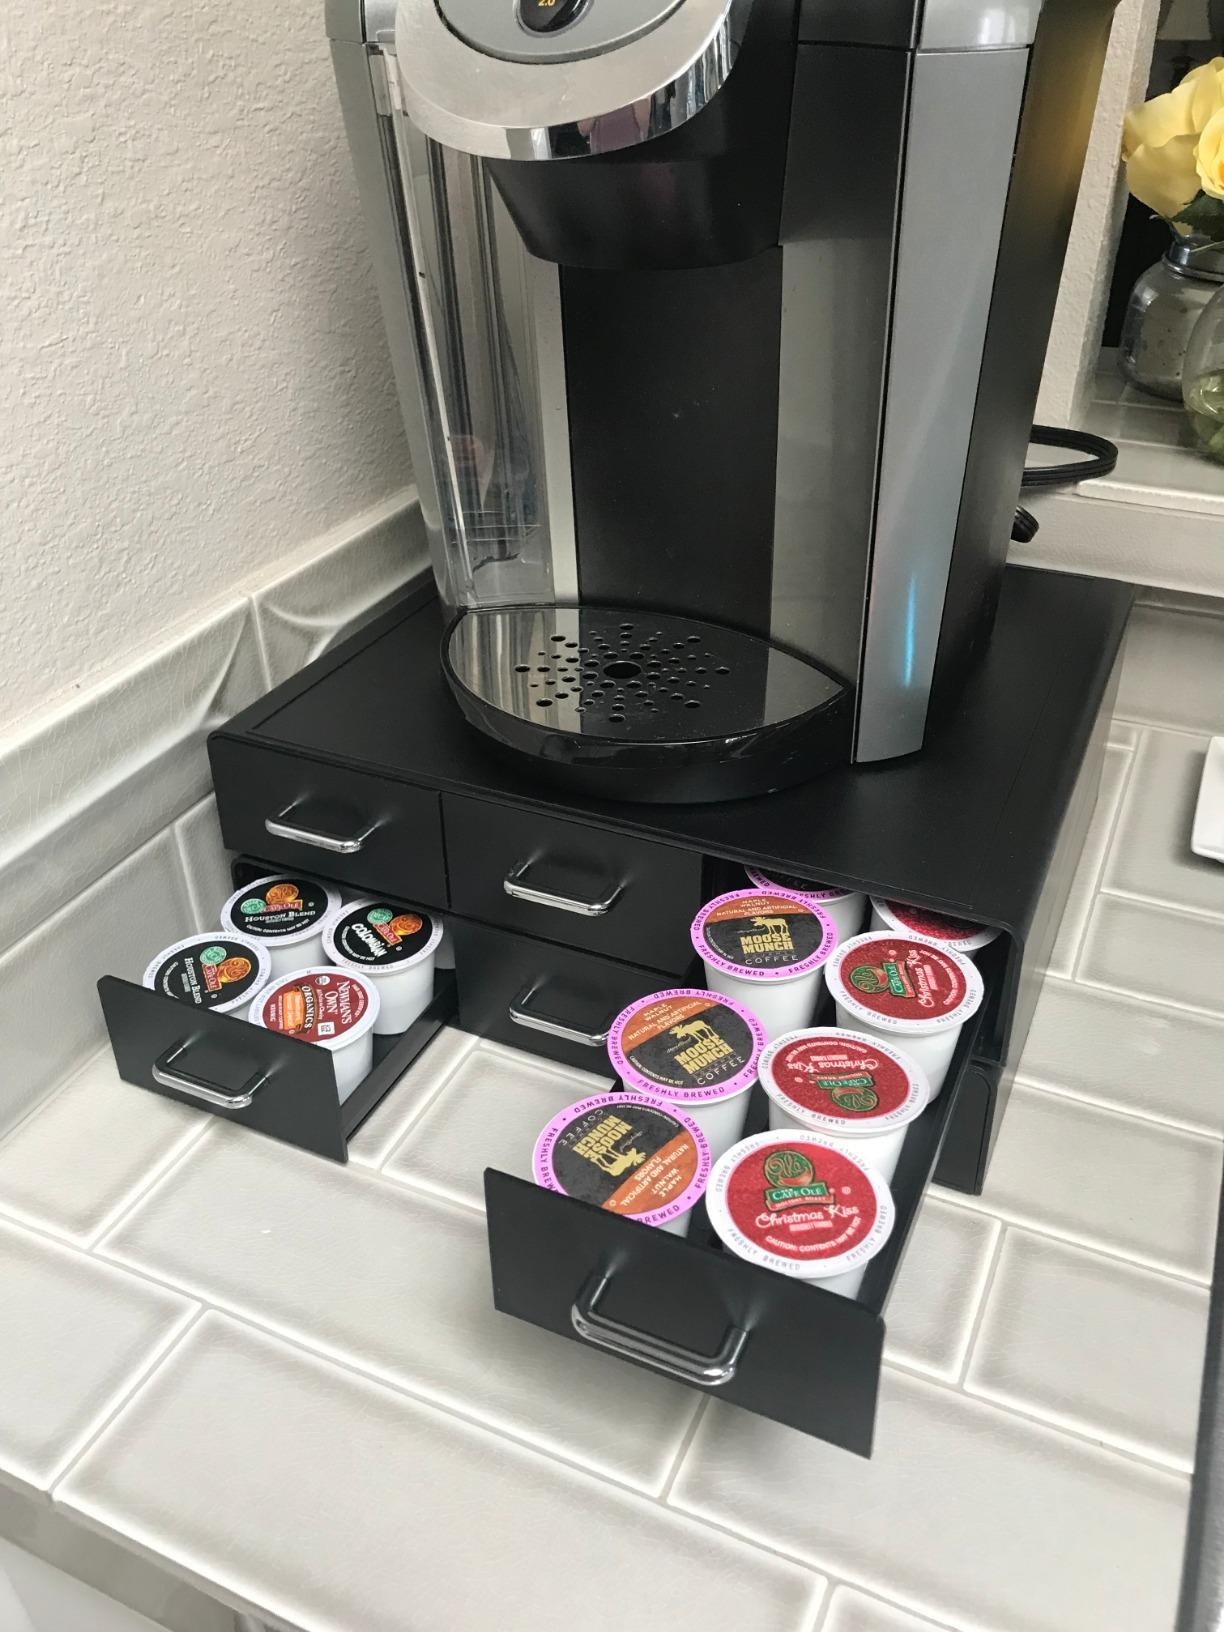 reviewer image of a keurig on top of the drawers with two drawers open showing the coffee pods inside